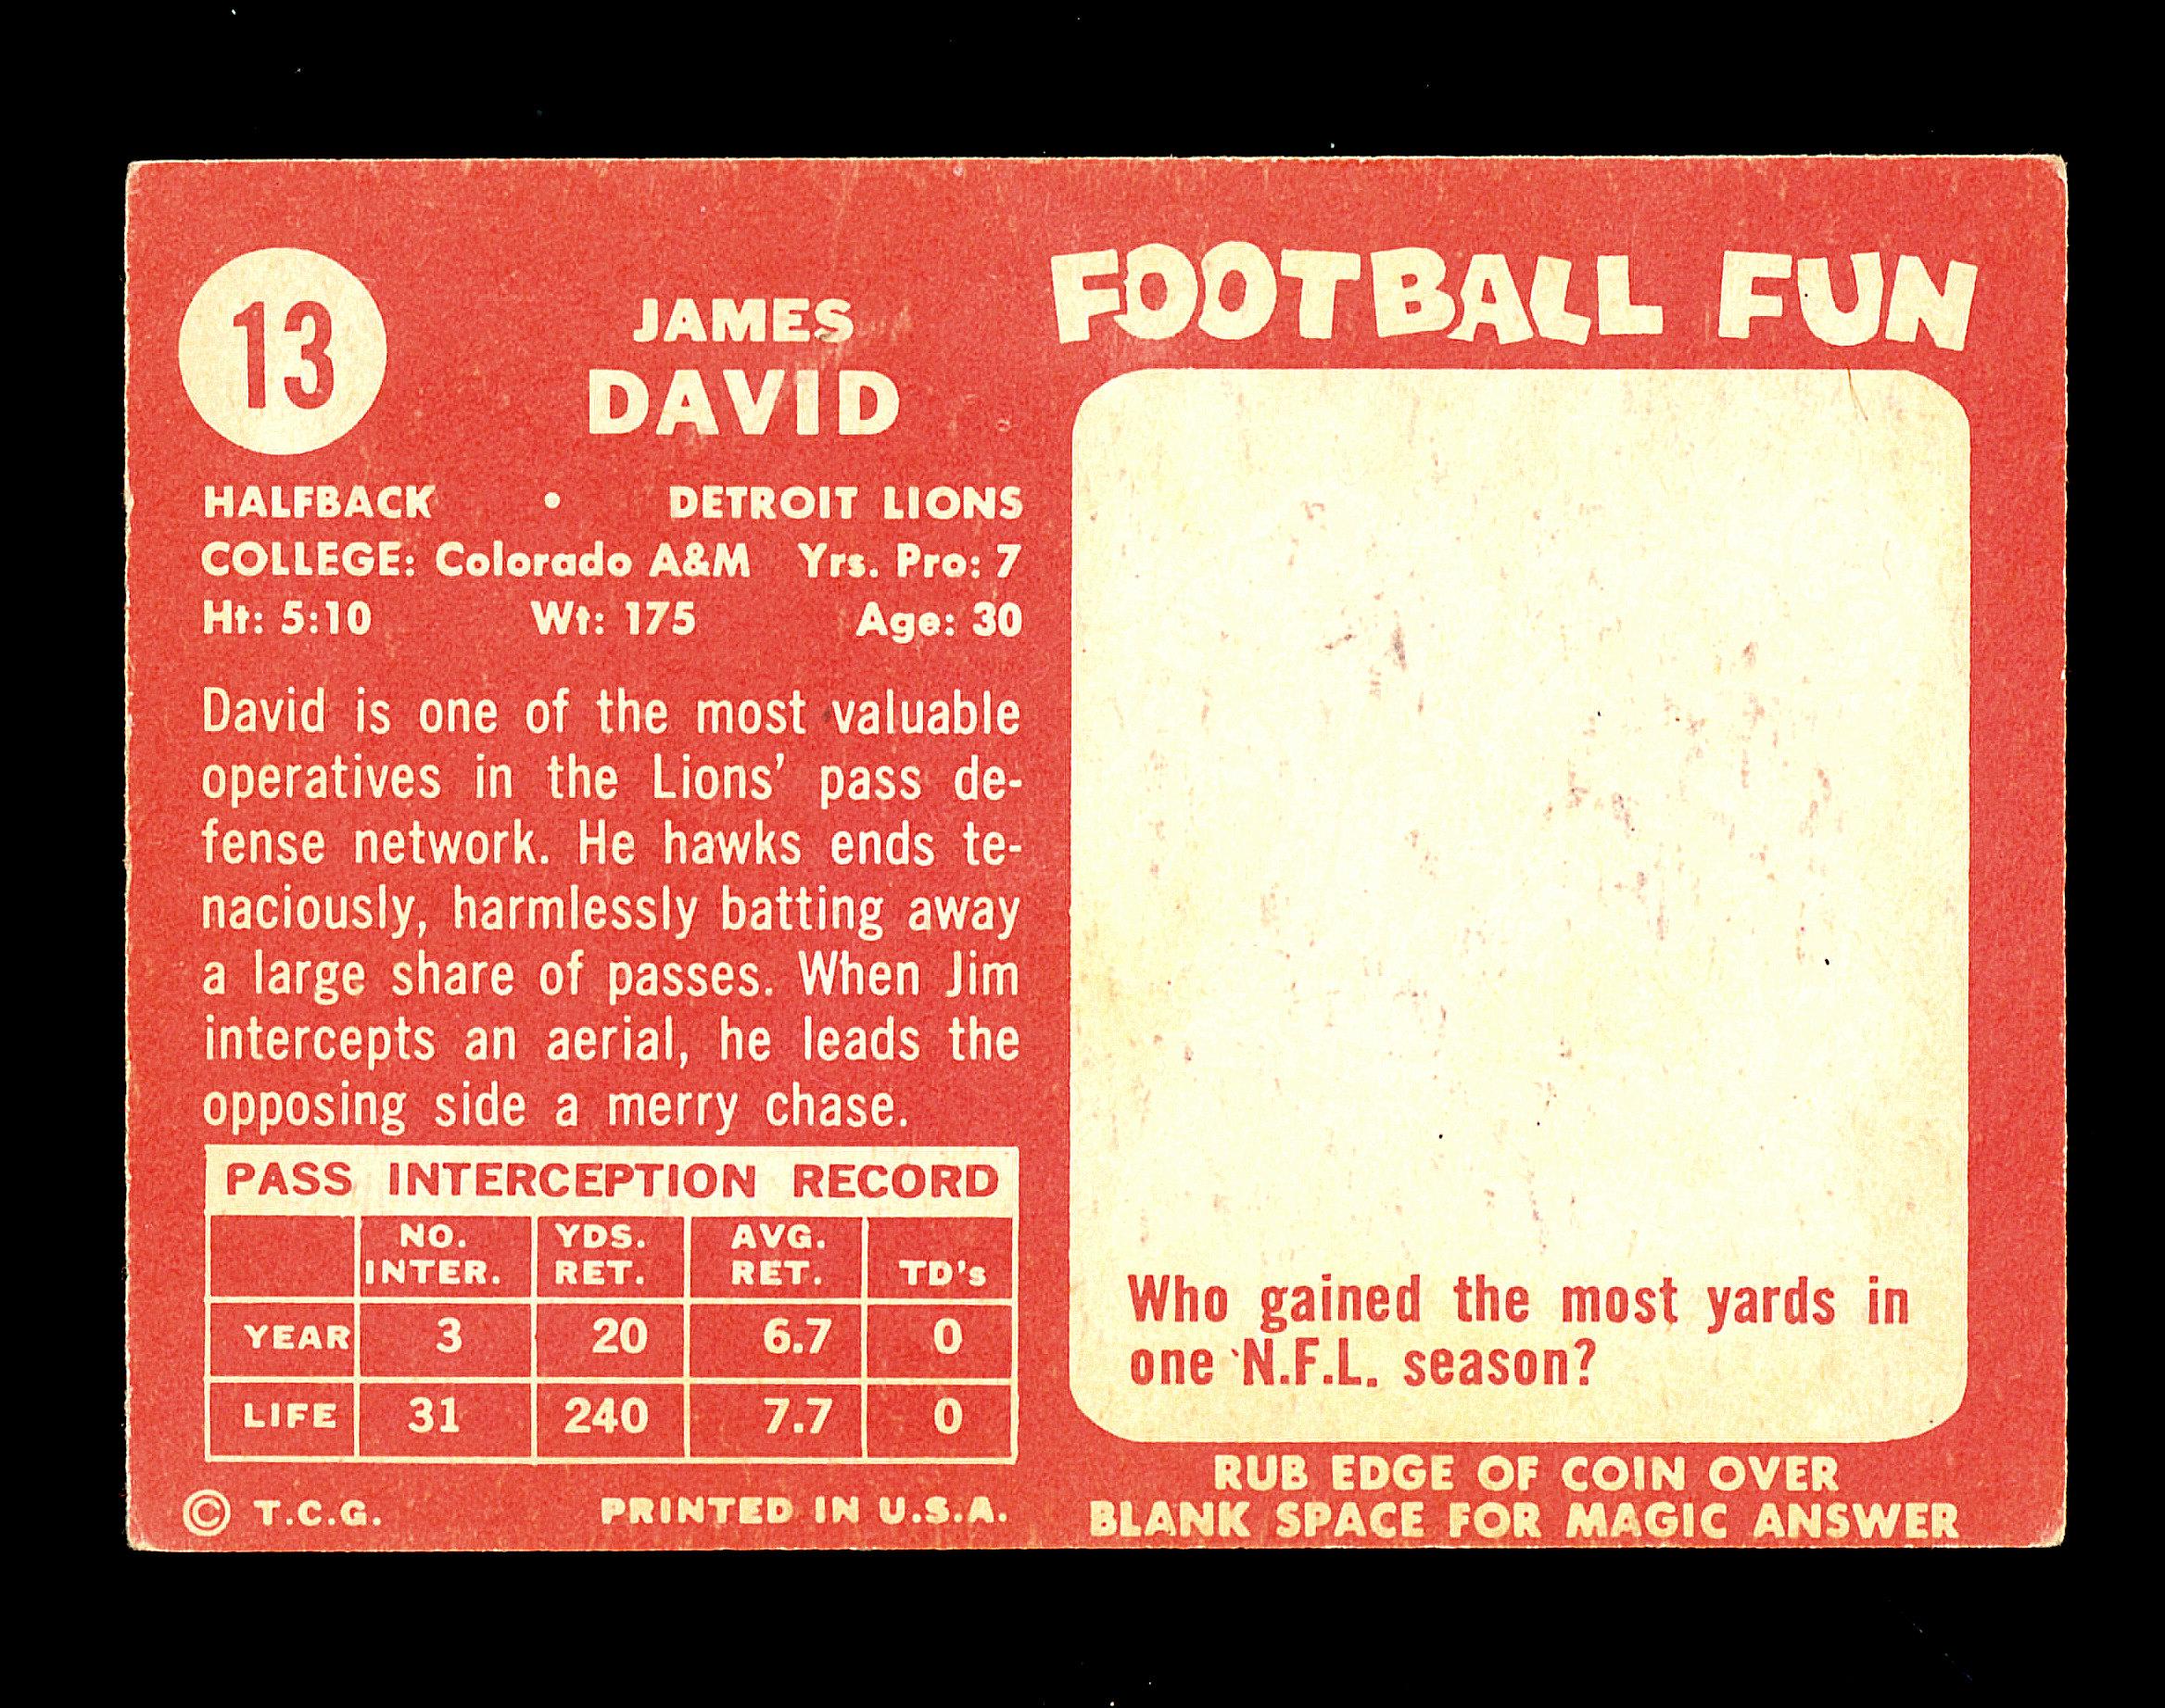 1958 Topps Football Card #13 James David Detroit Lions. EX Condition